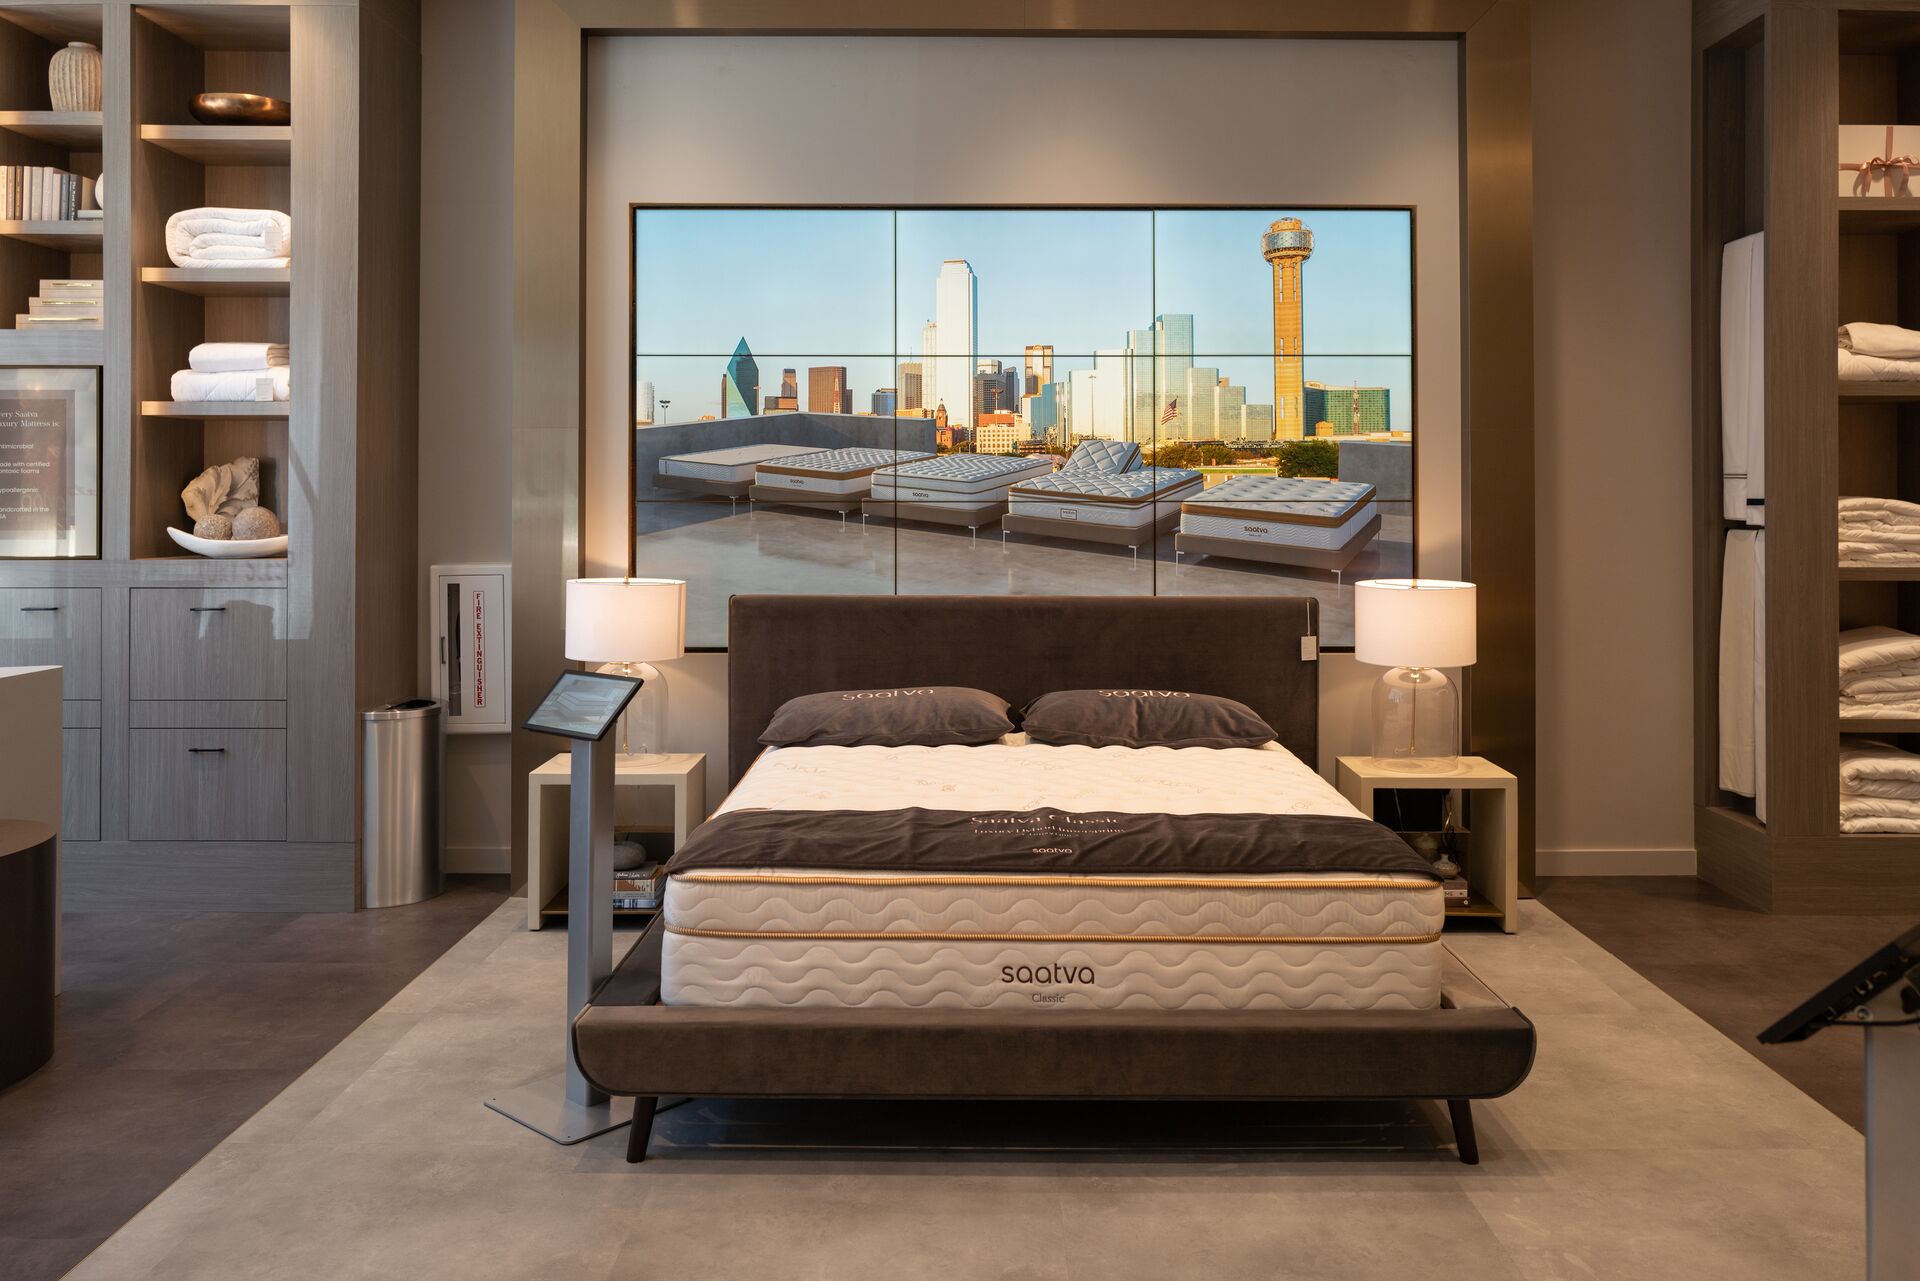 Saatva Dallas' Hero Bed with a customizable, high-definition heaboard created by the latest in Samsung's retail display technology